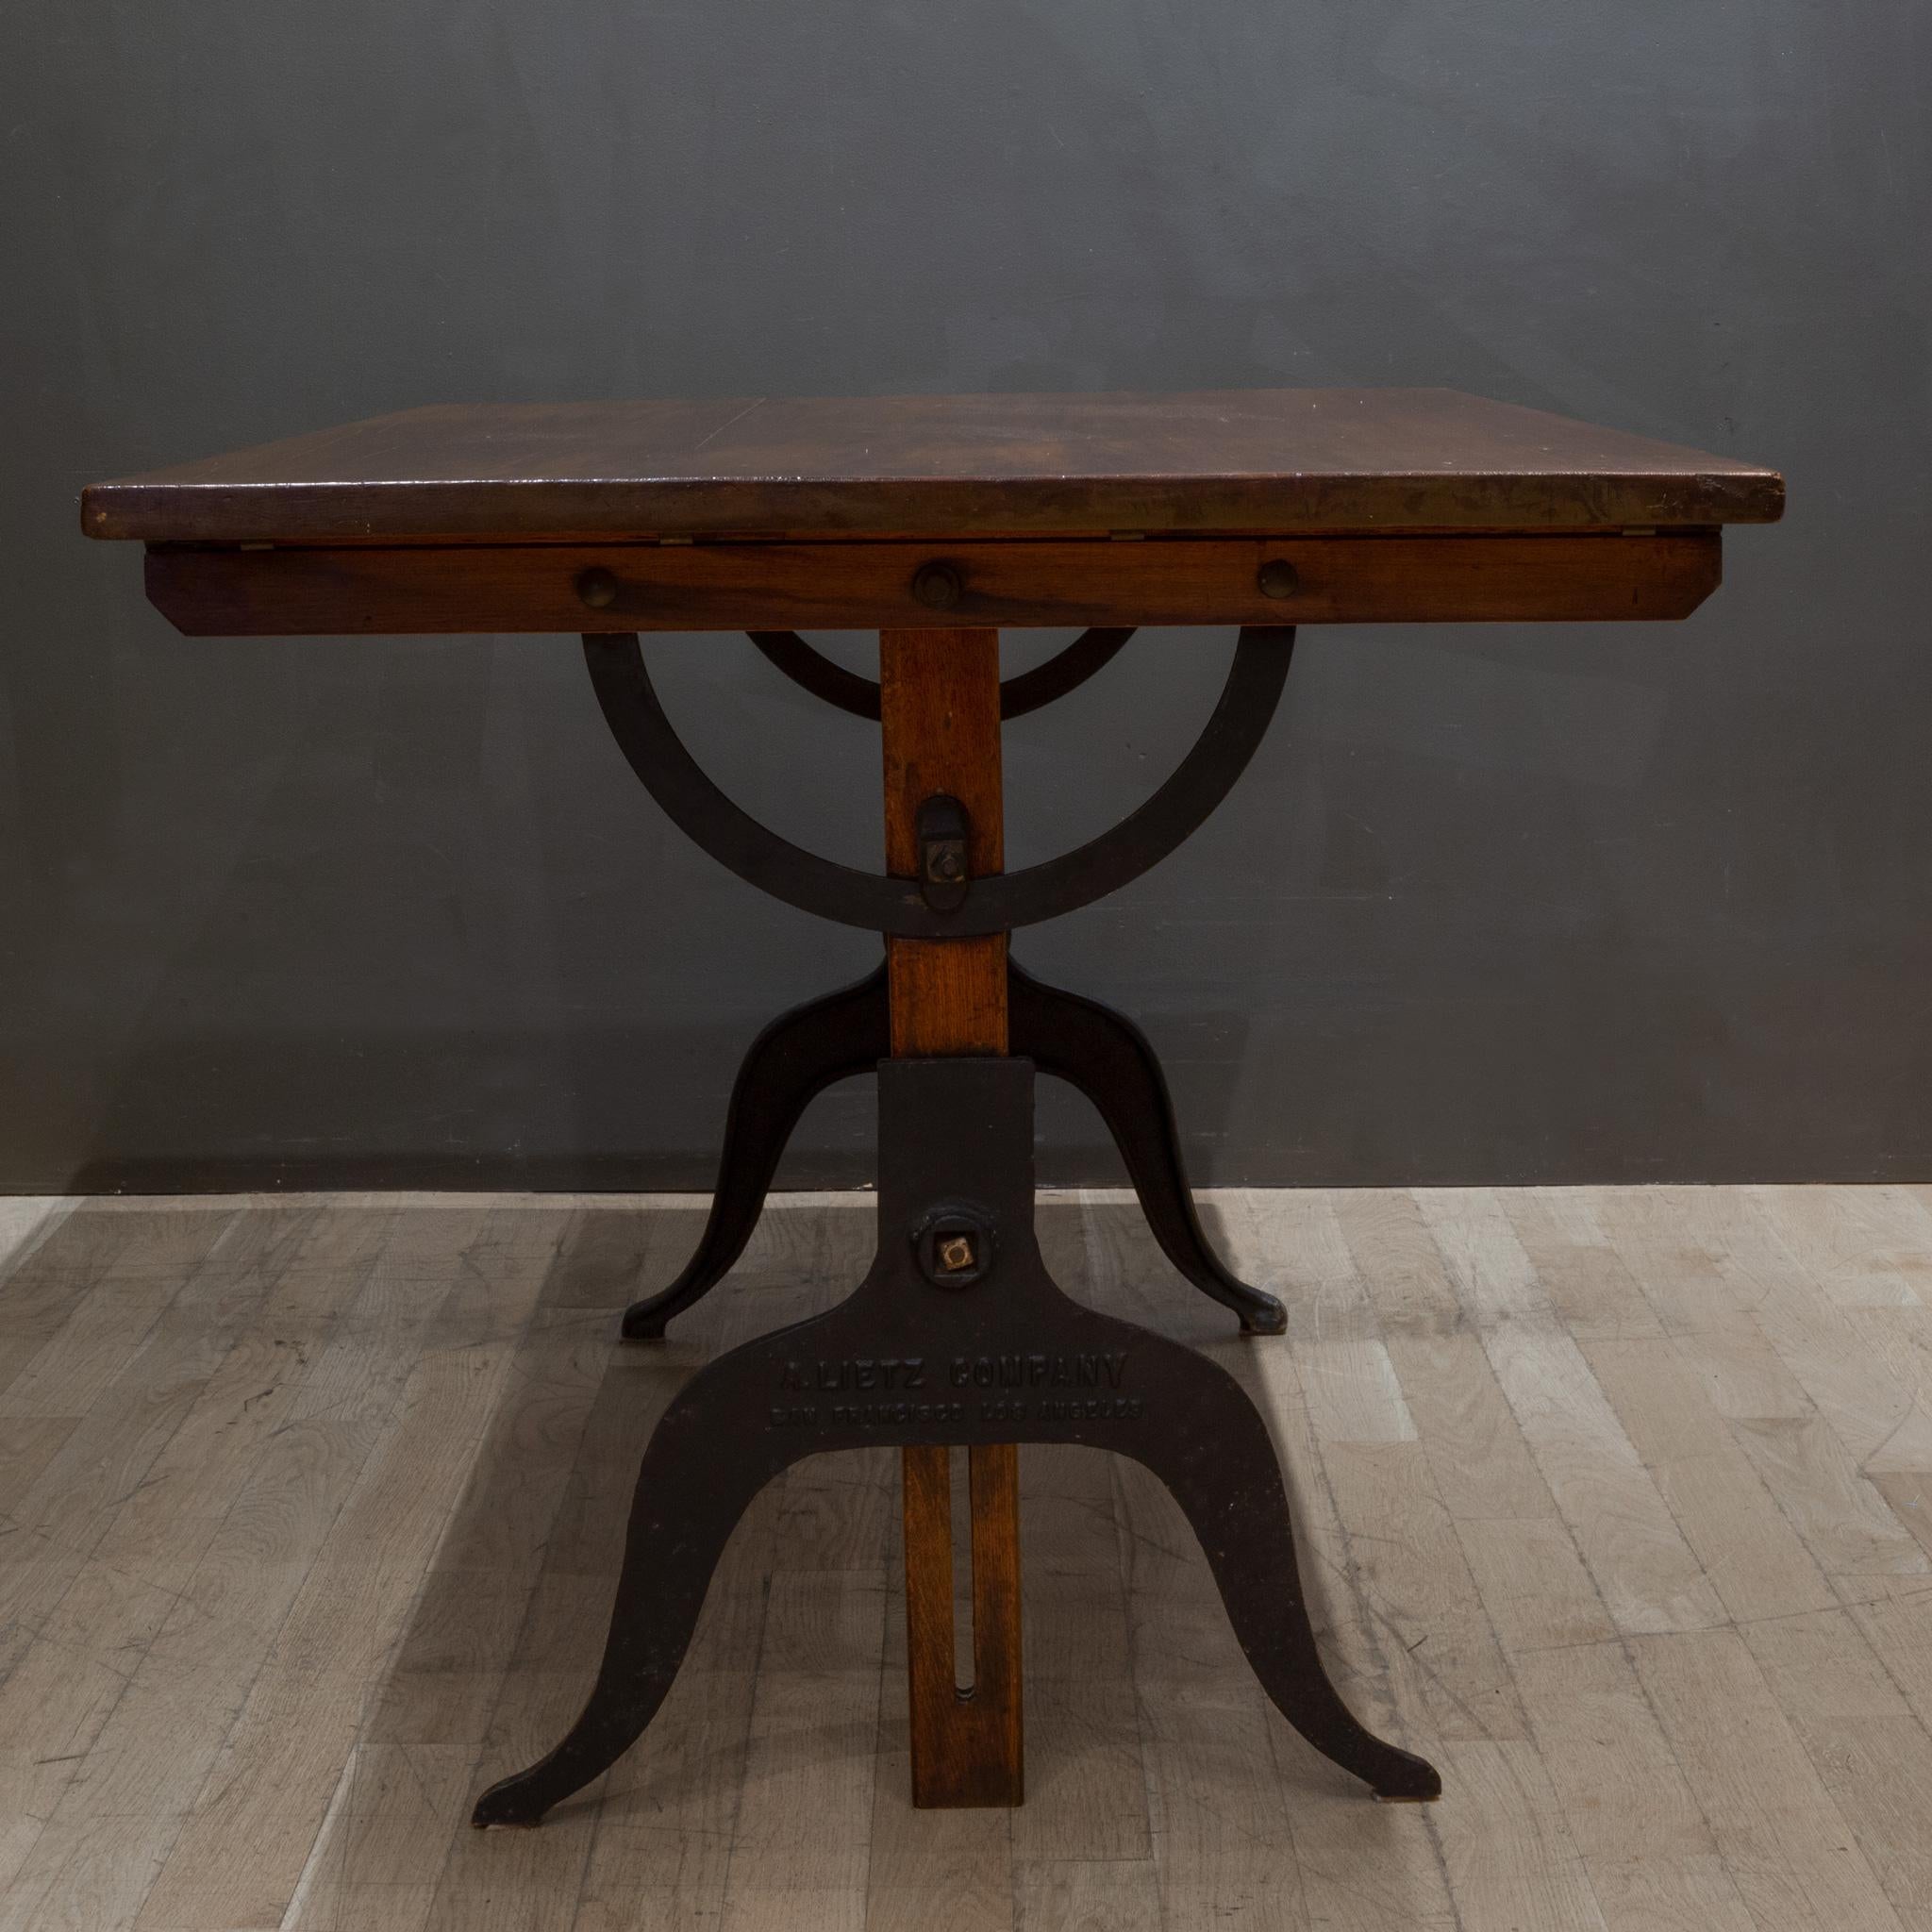 20th Century Antique Refinished A. Lietz Co. Wood and Cast Iron Drafting Table, circa 1930